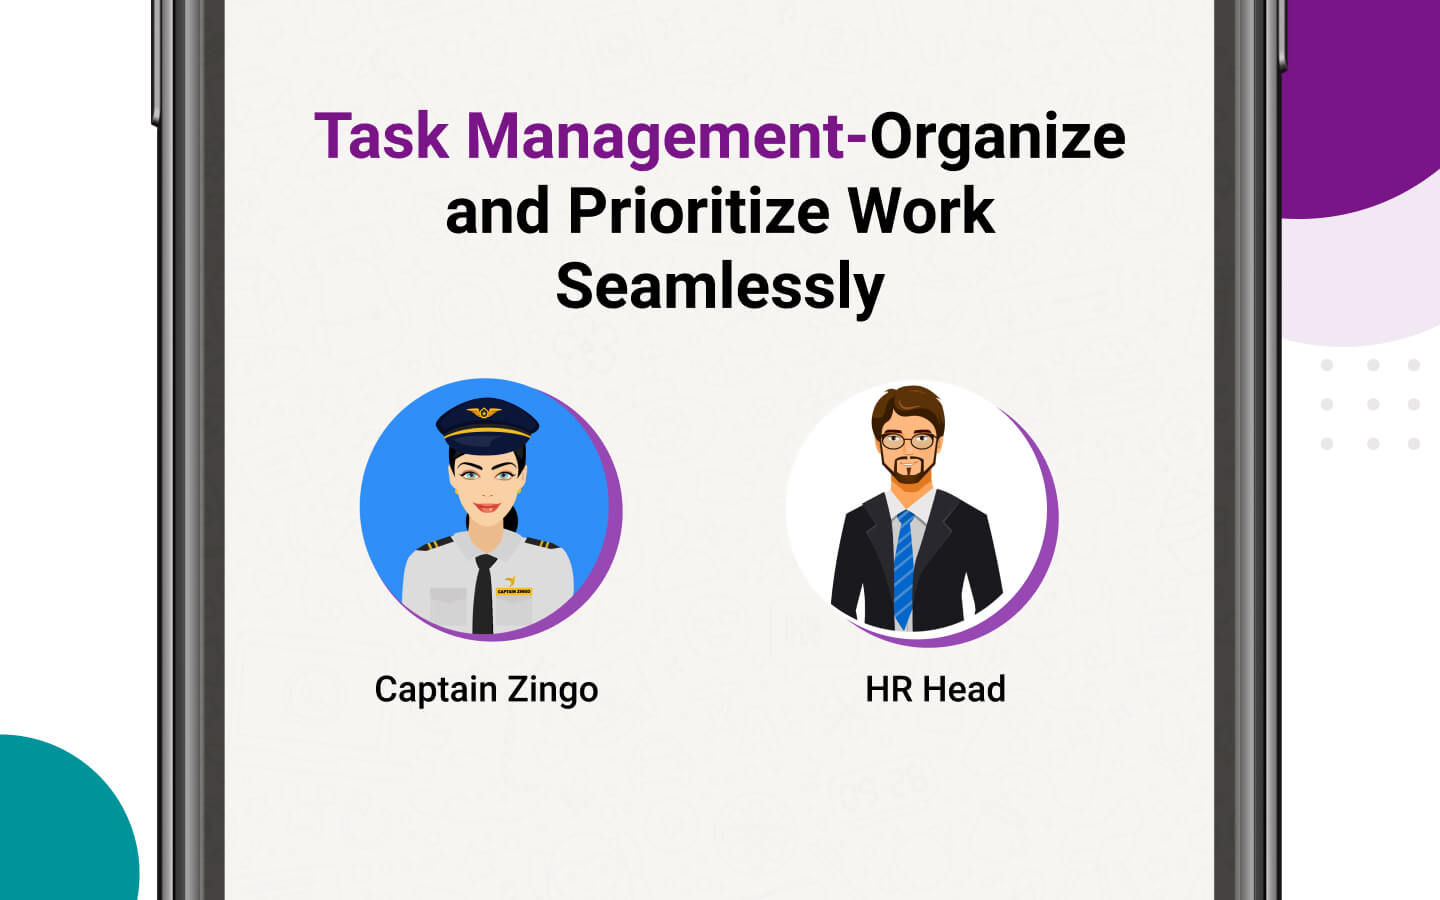 Task Management-Organize and Prioritize Work Seamlessly